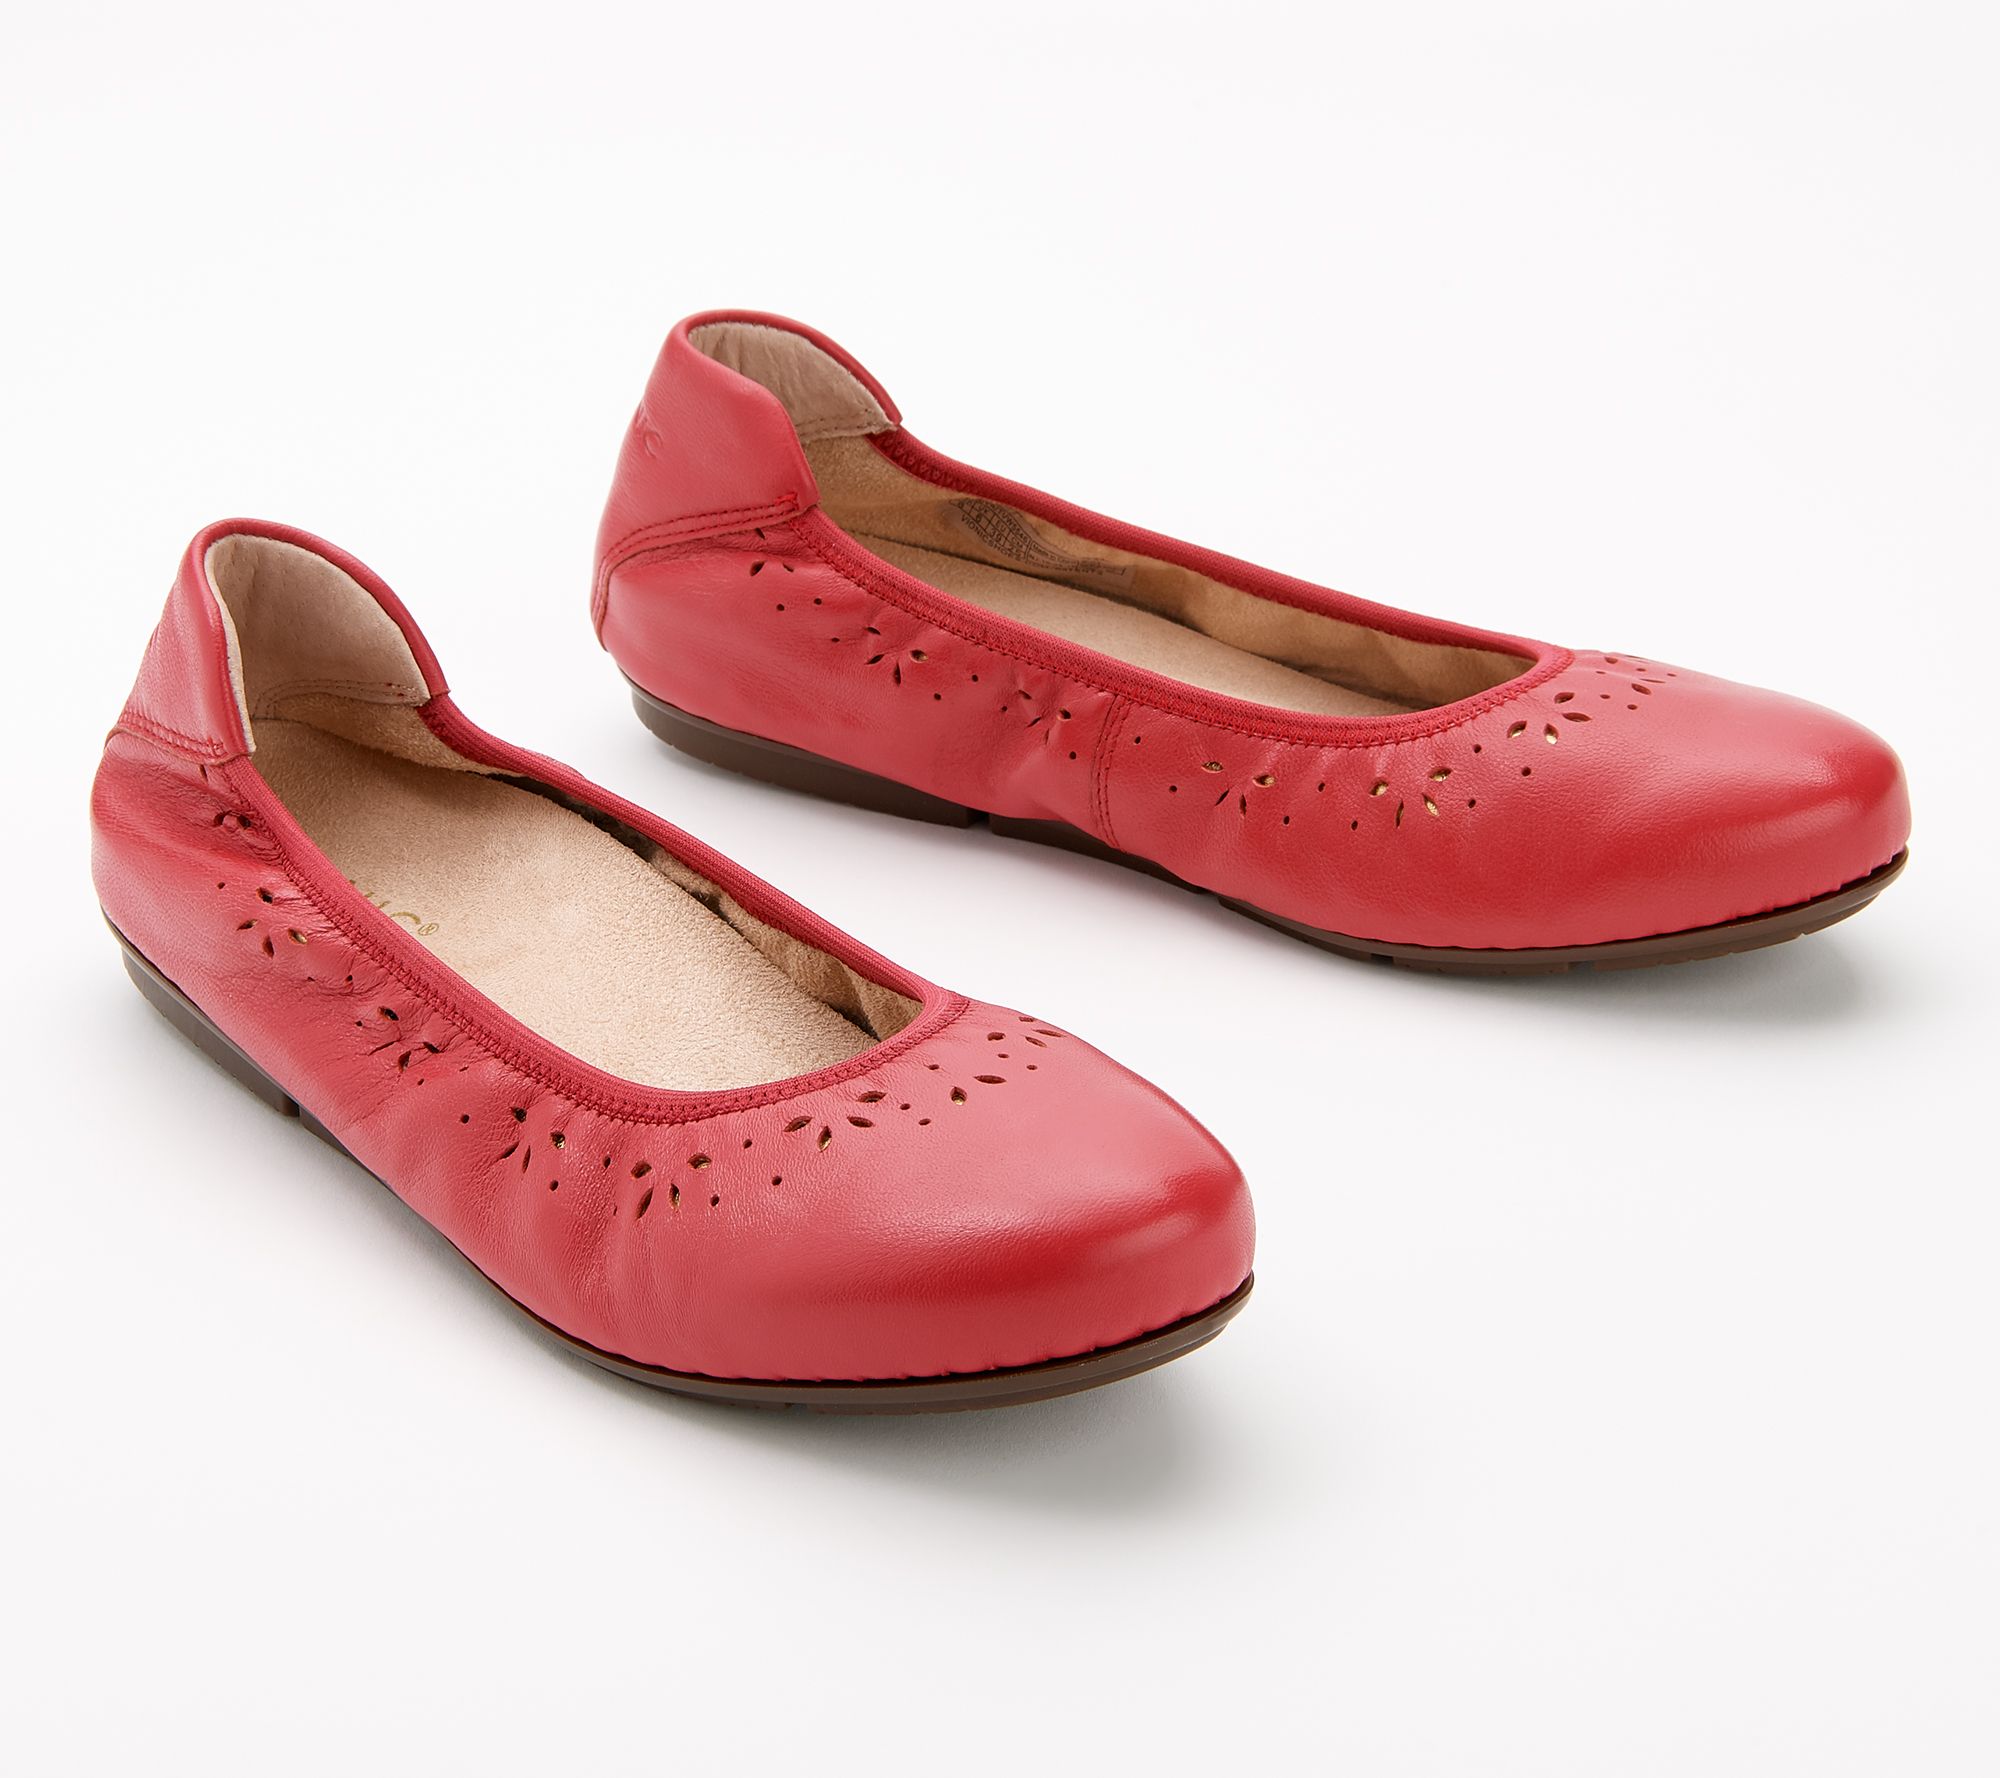 Vionic Leather Perforated Flats 